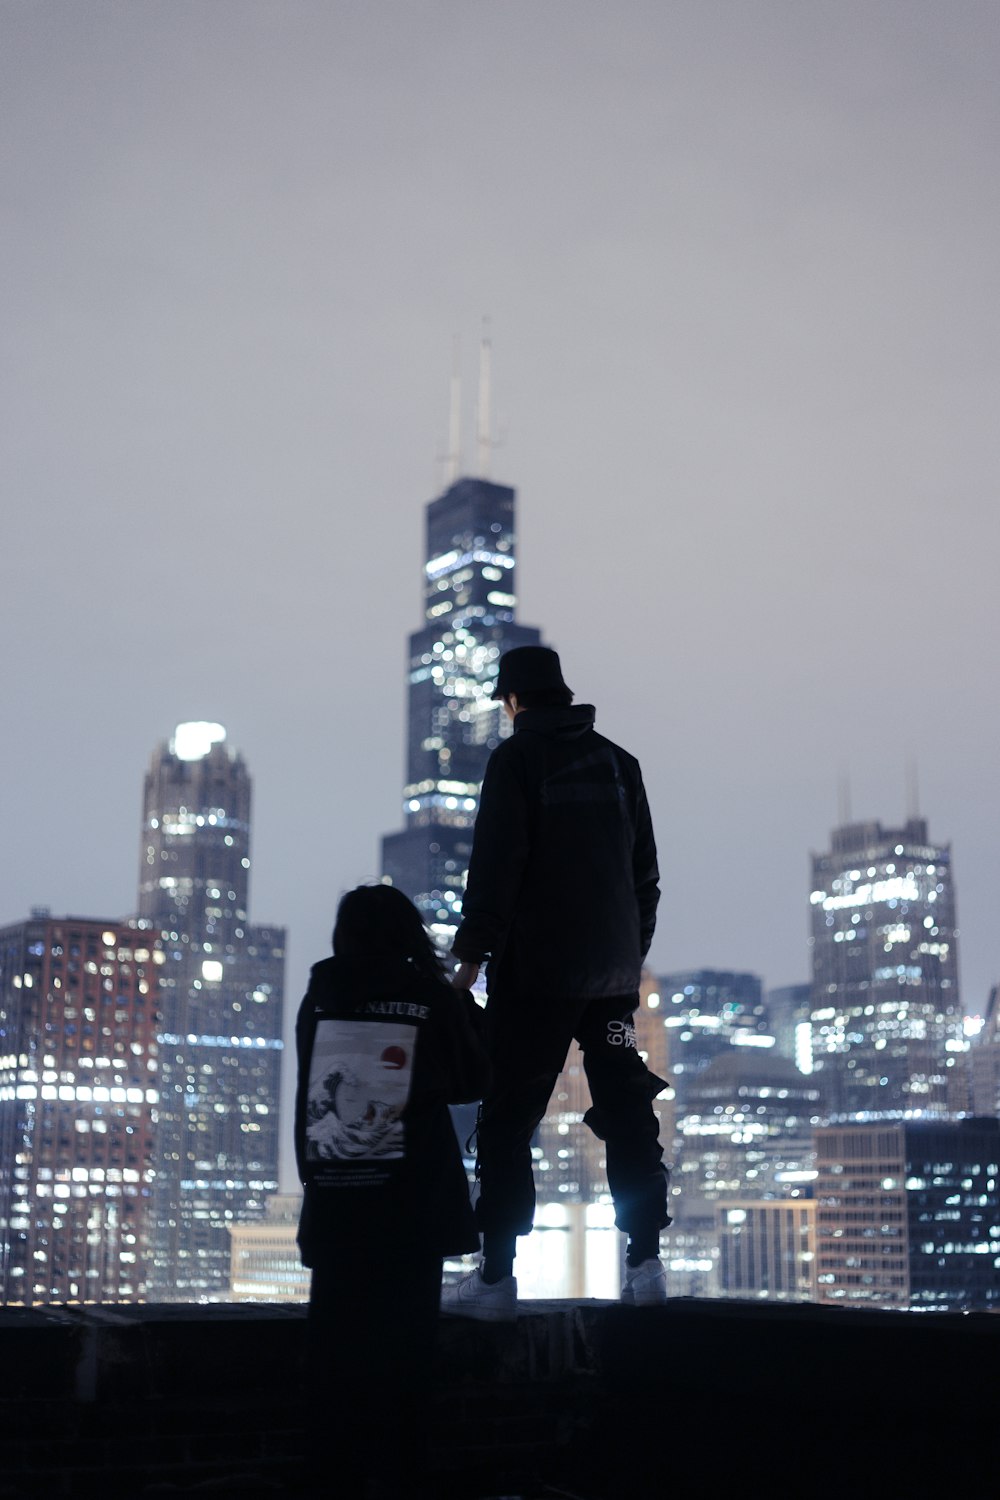 silhouette photography of two person standing near edge overlooking high-rise buildings